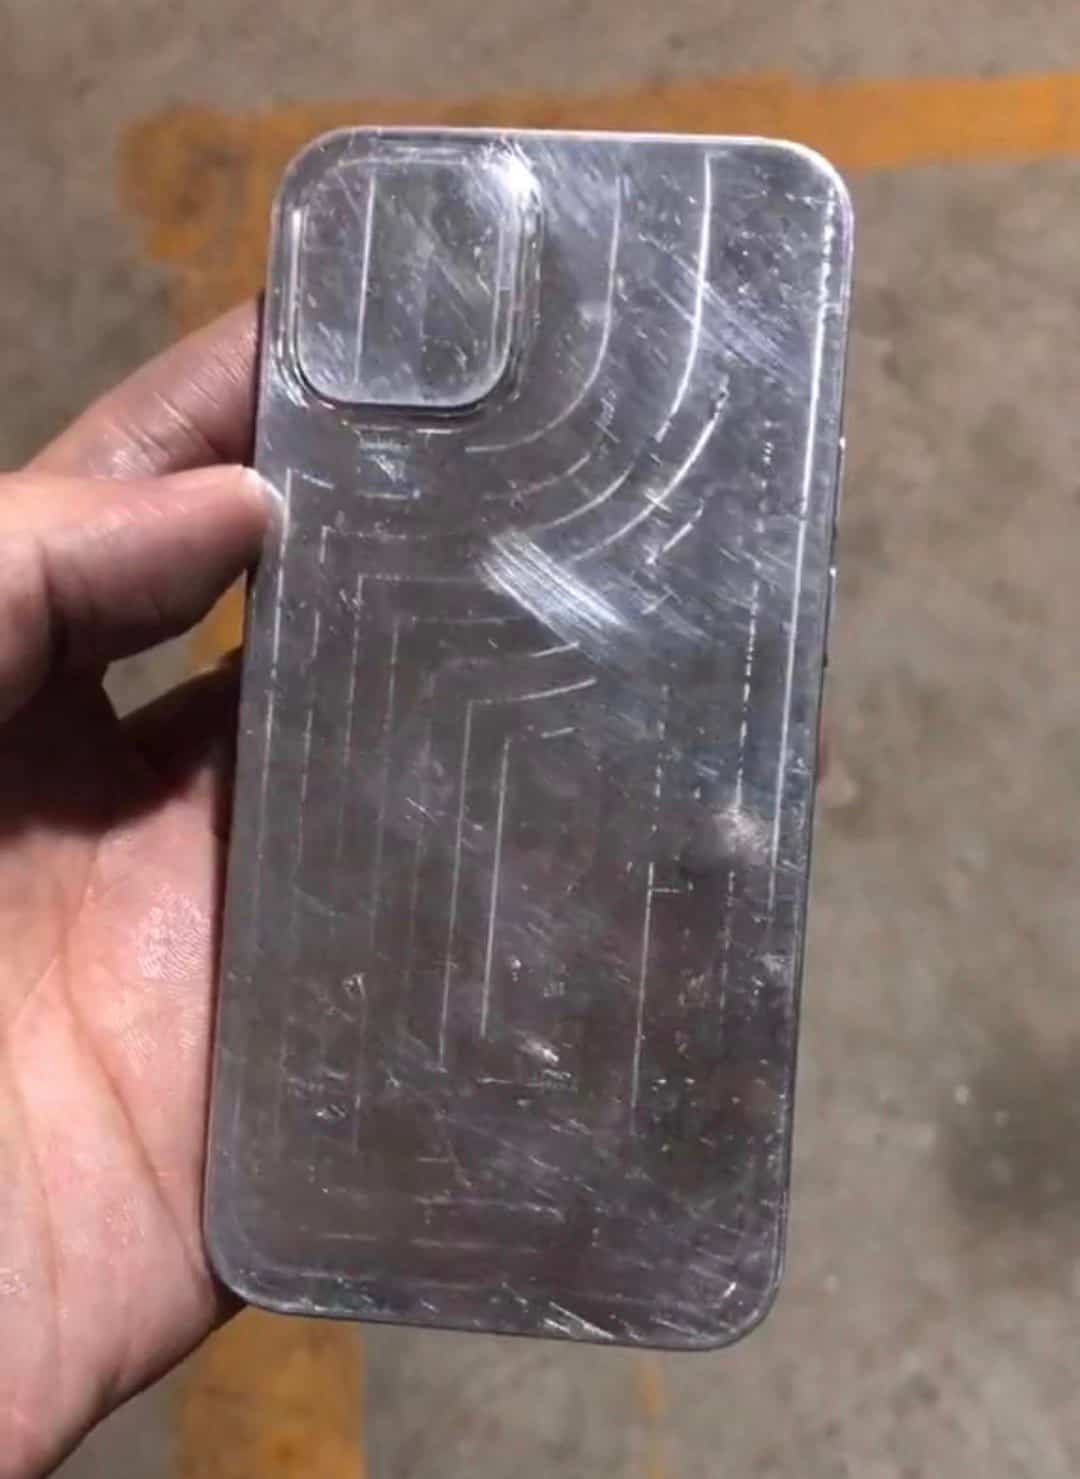 iPhone 12 series molds and CAD leaks 